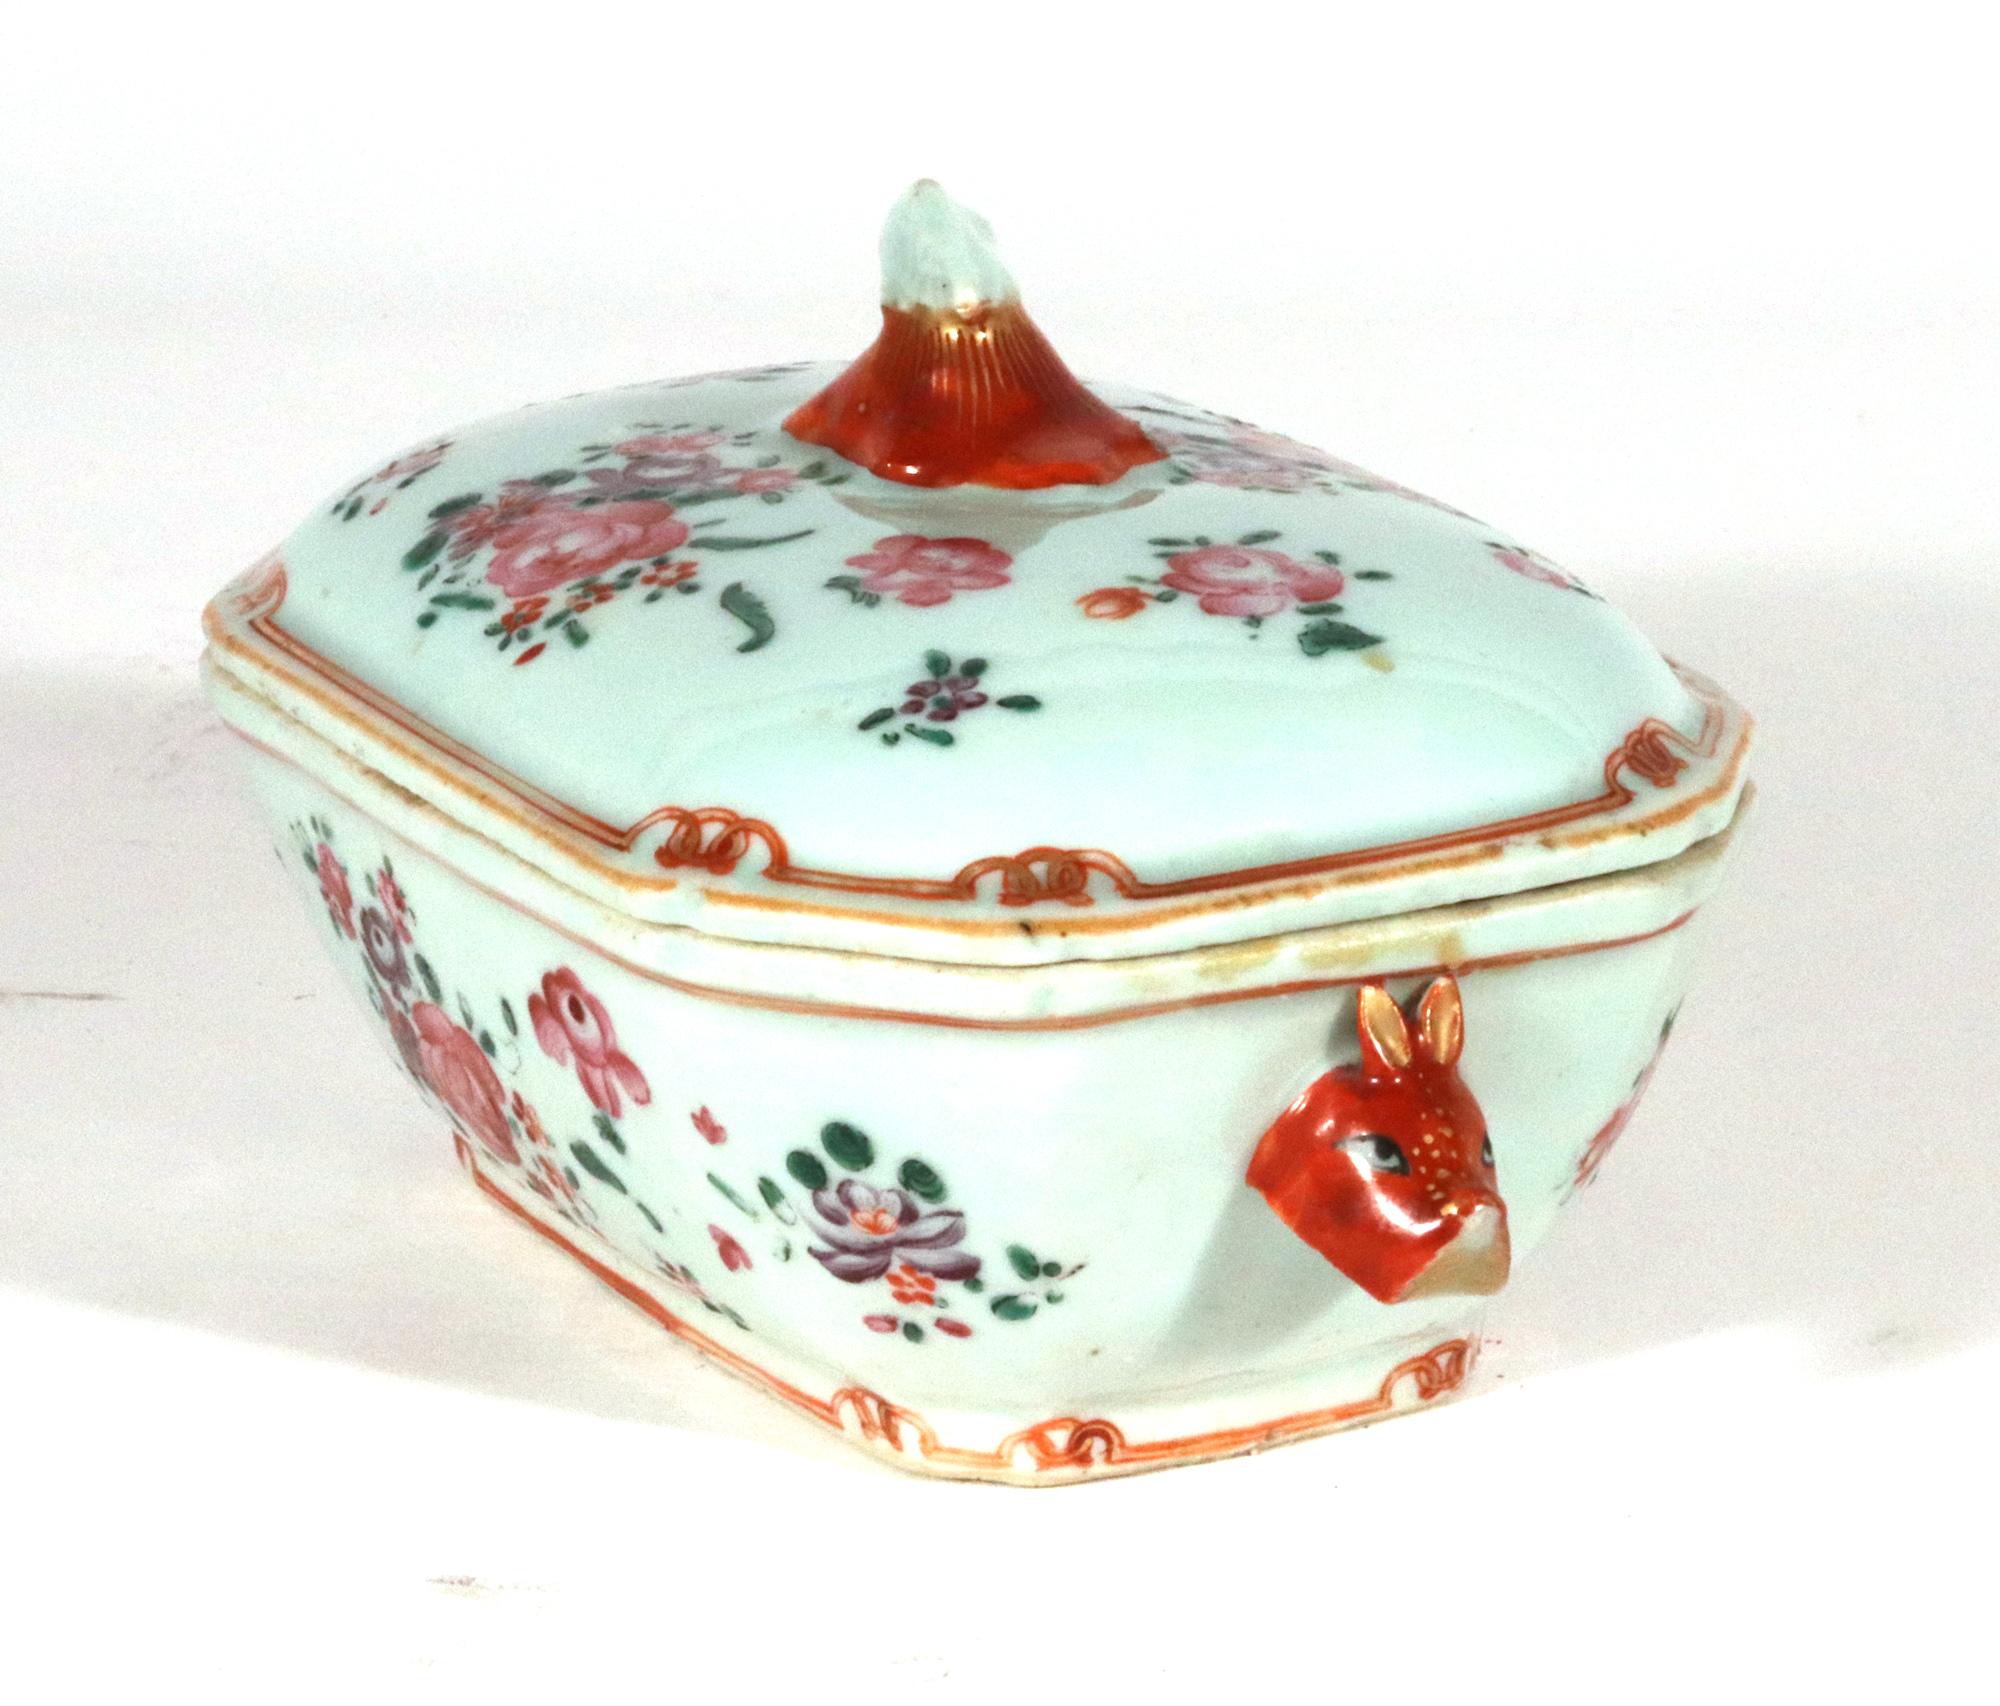 Chinese Export Porcelain Famille Rose Sauce Tureens, Covers & Stands For Sale 12